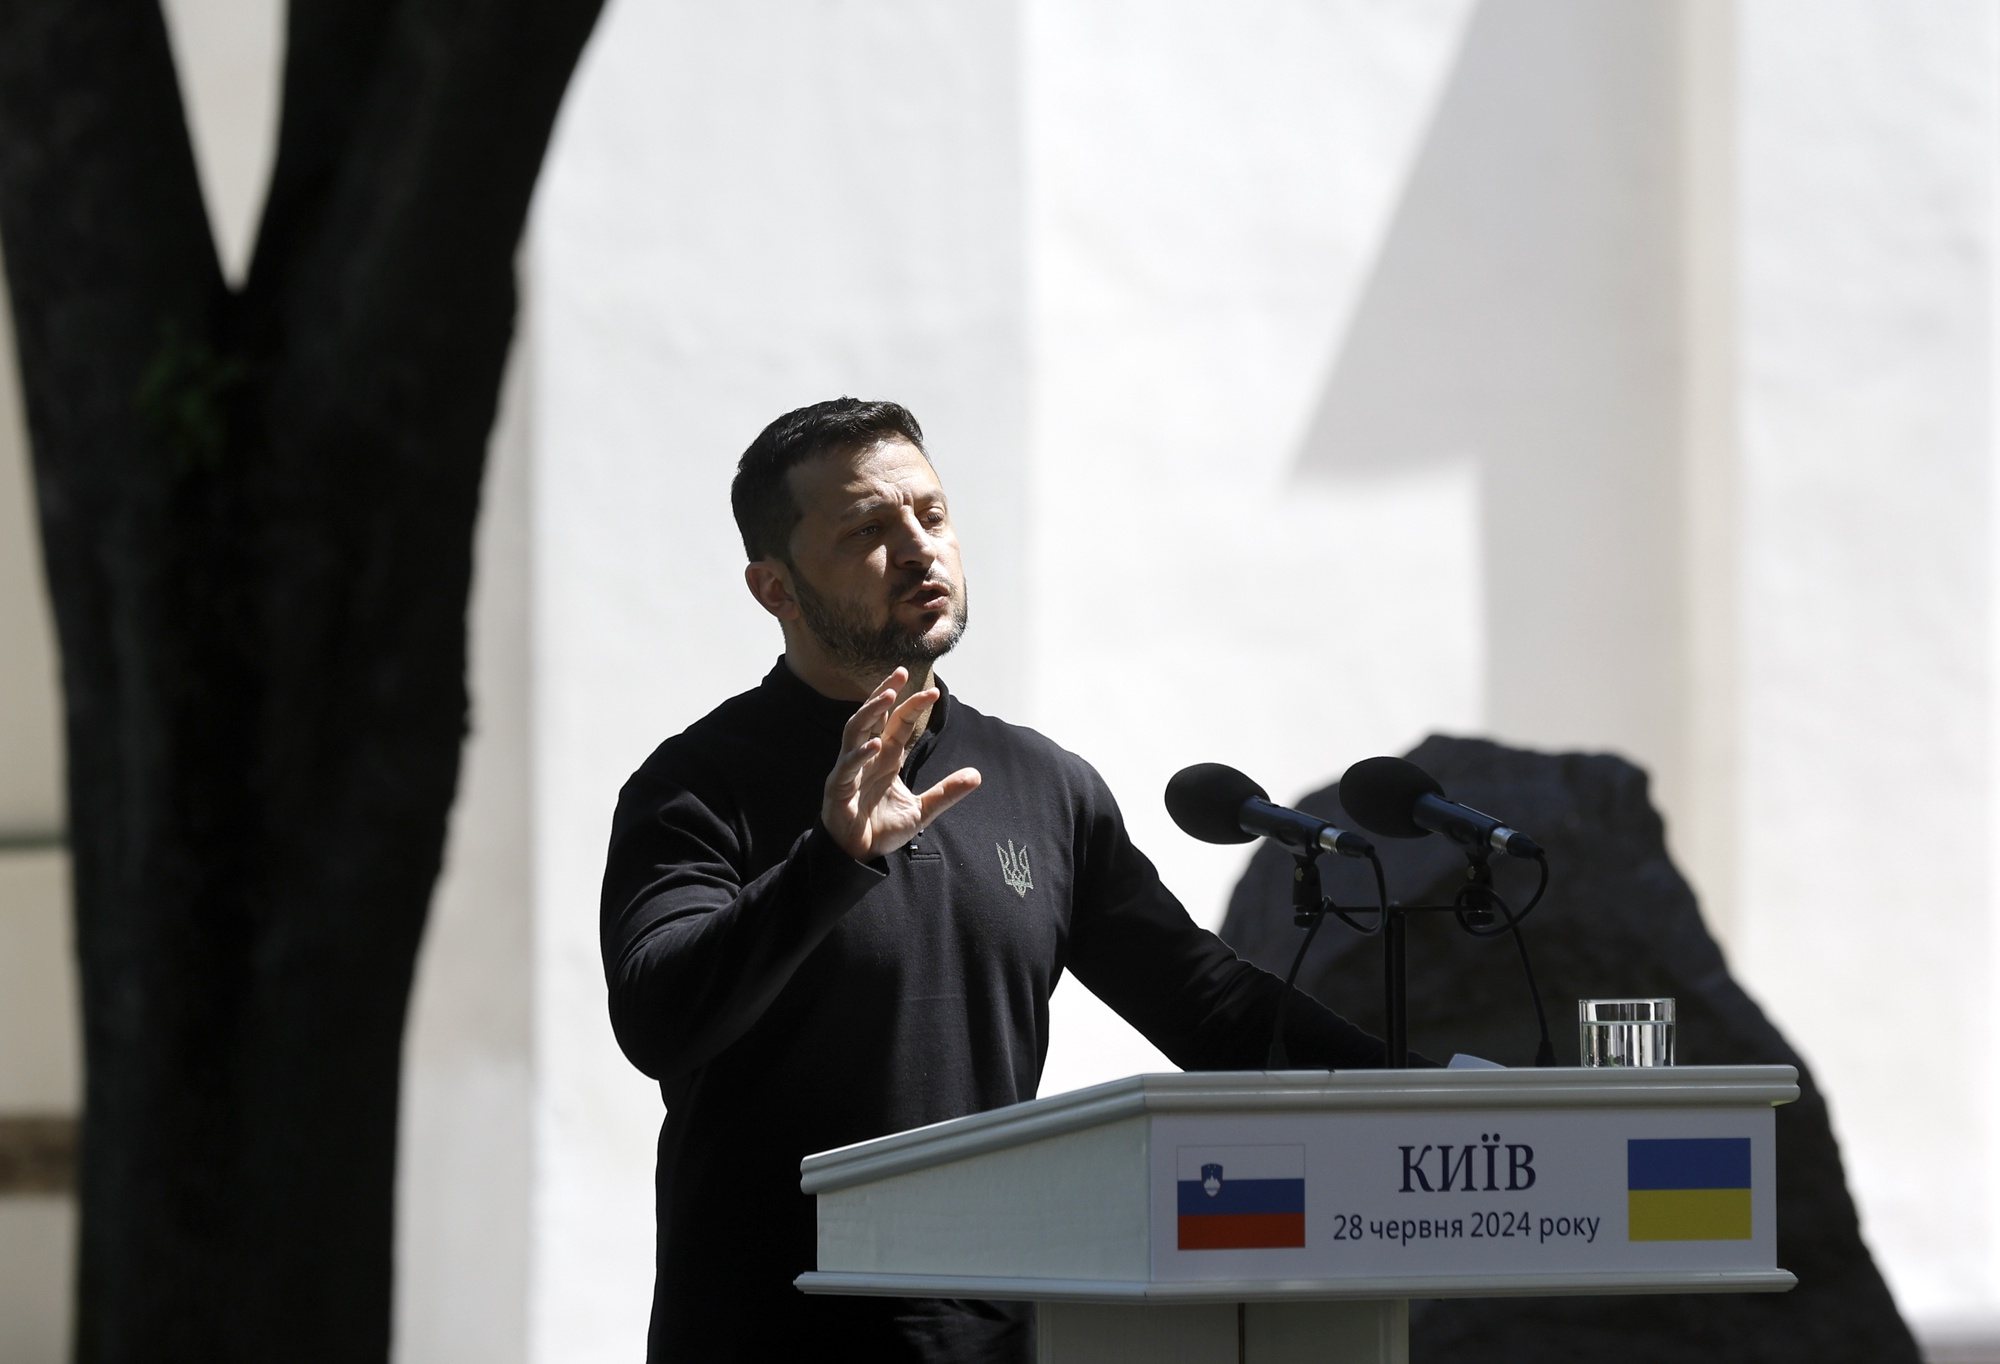 epa11443036 Ukrainian President Volodymyr Zelensky speaks during a joint press conference with Slovenian president near the St. Sophia Cathedral in Kyiv, Ukraine, 28 June 2024. Pirc Musar arrived in Kyiv to meet with top Ukrainian officials amid the ongoing Russian invasion.  EPA/SERGEY DOLZHENKO